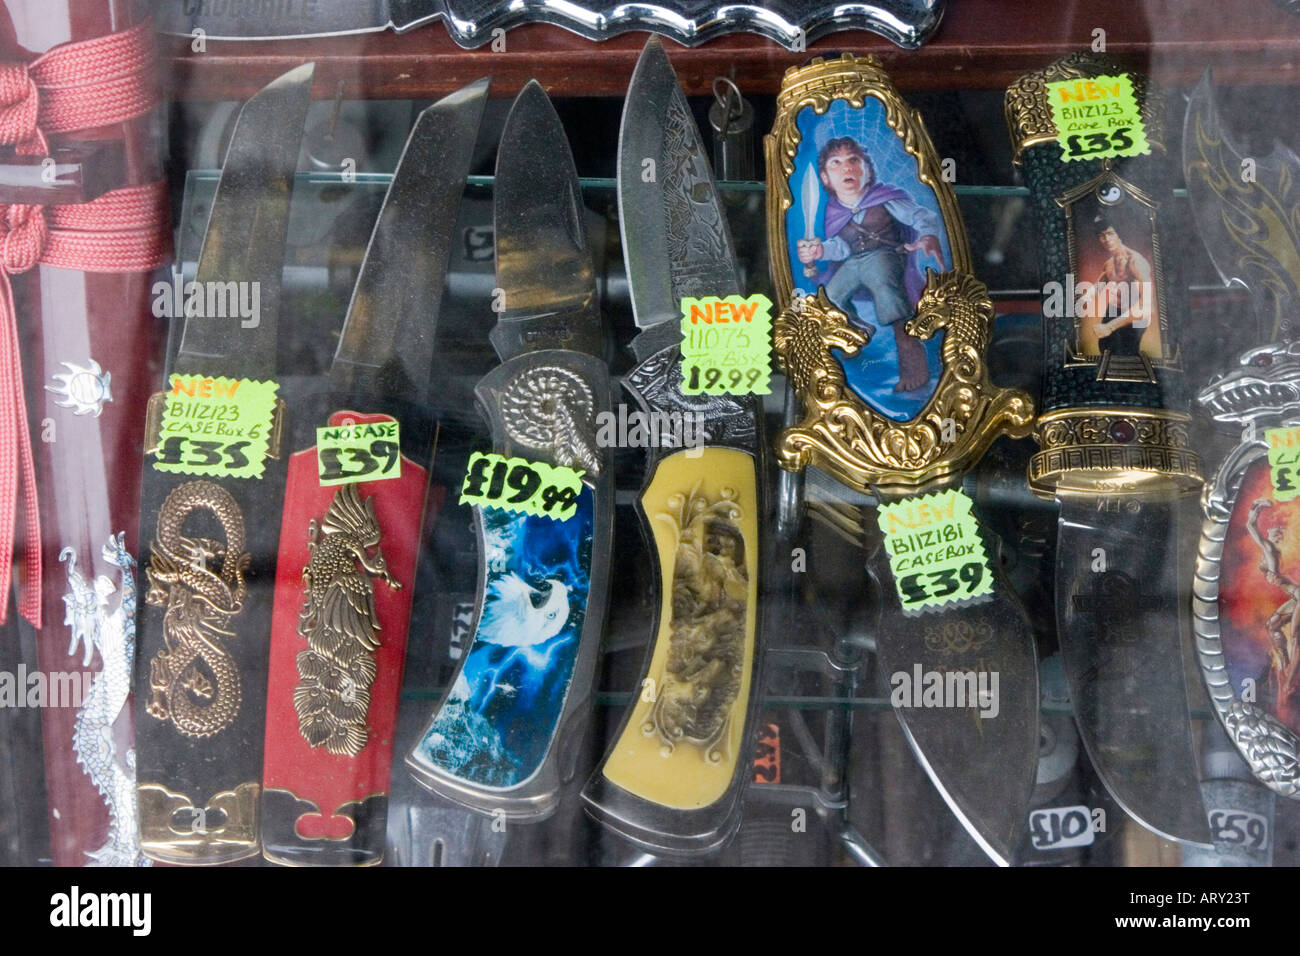 Decorated knives for sale in a shop window display Stock Photo